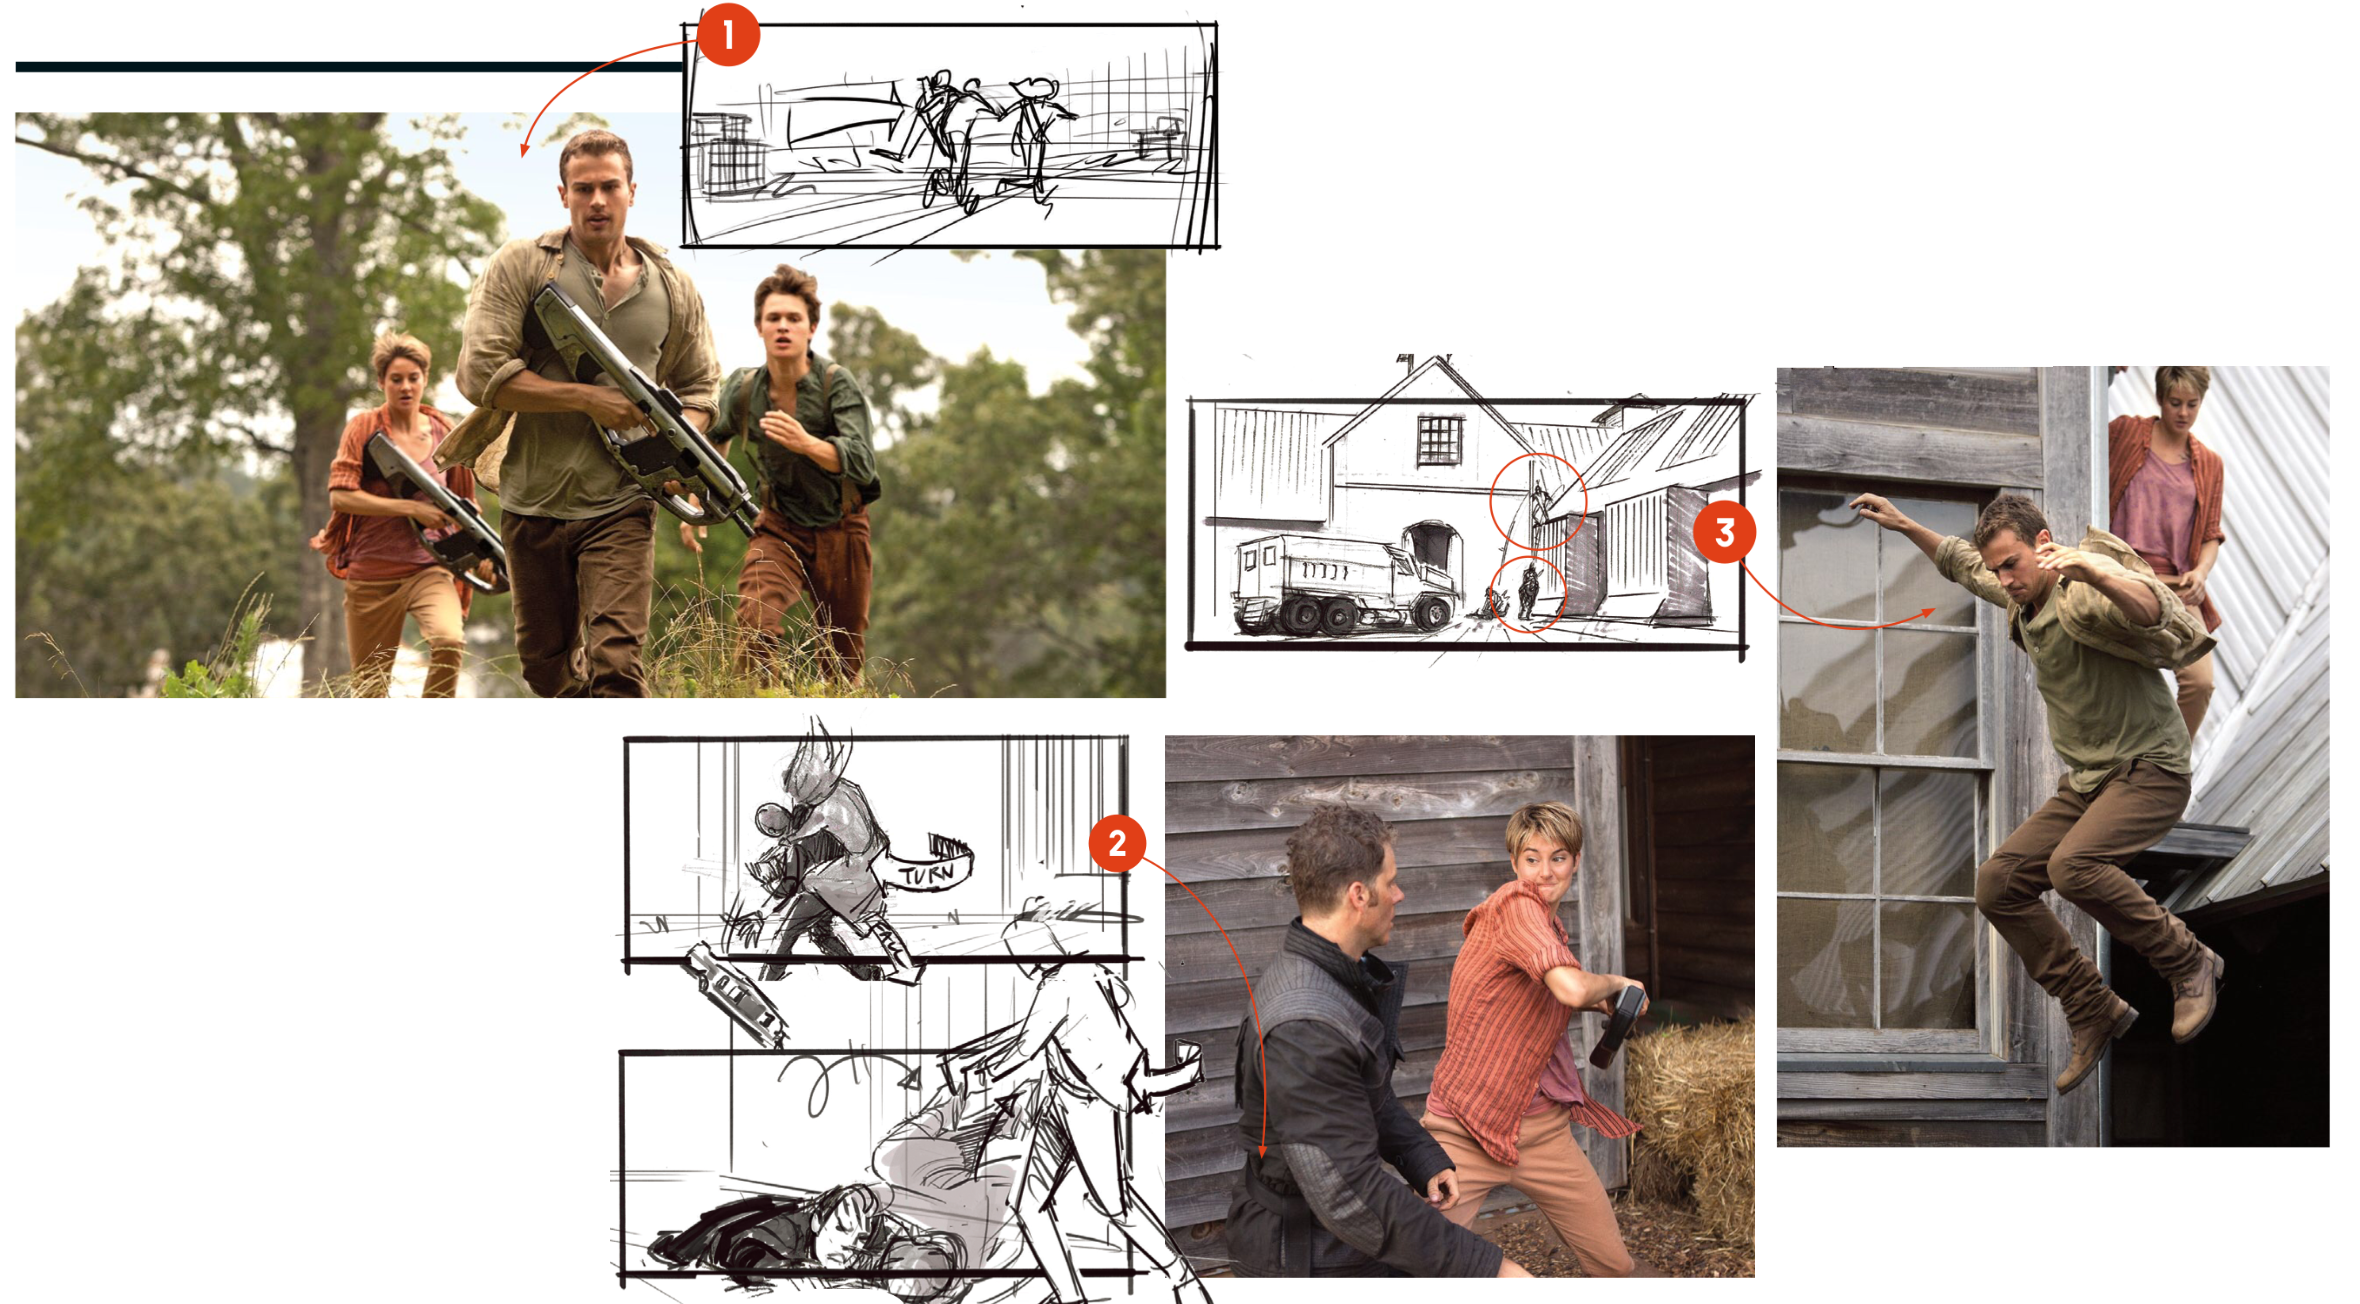 HQ SCANS: Insurgent “Shooting the First Big Battle” Entertainment Weekly Article